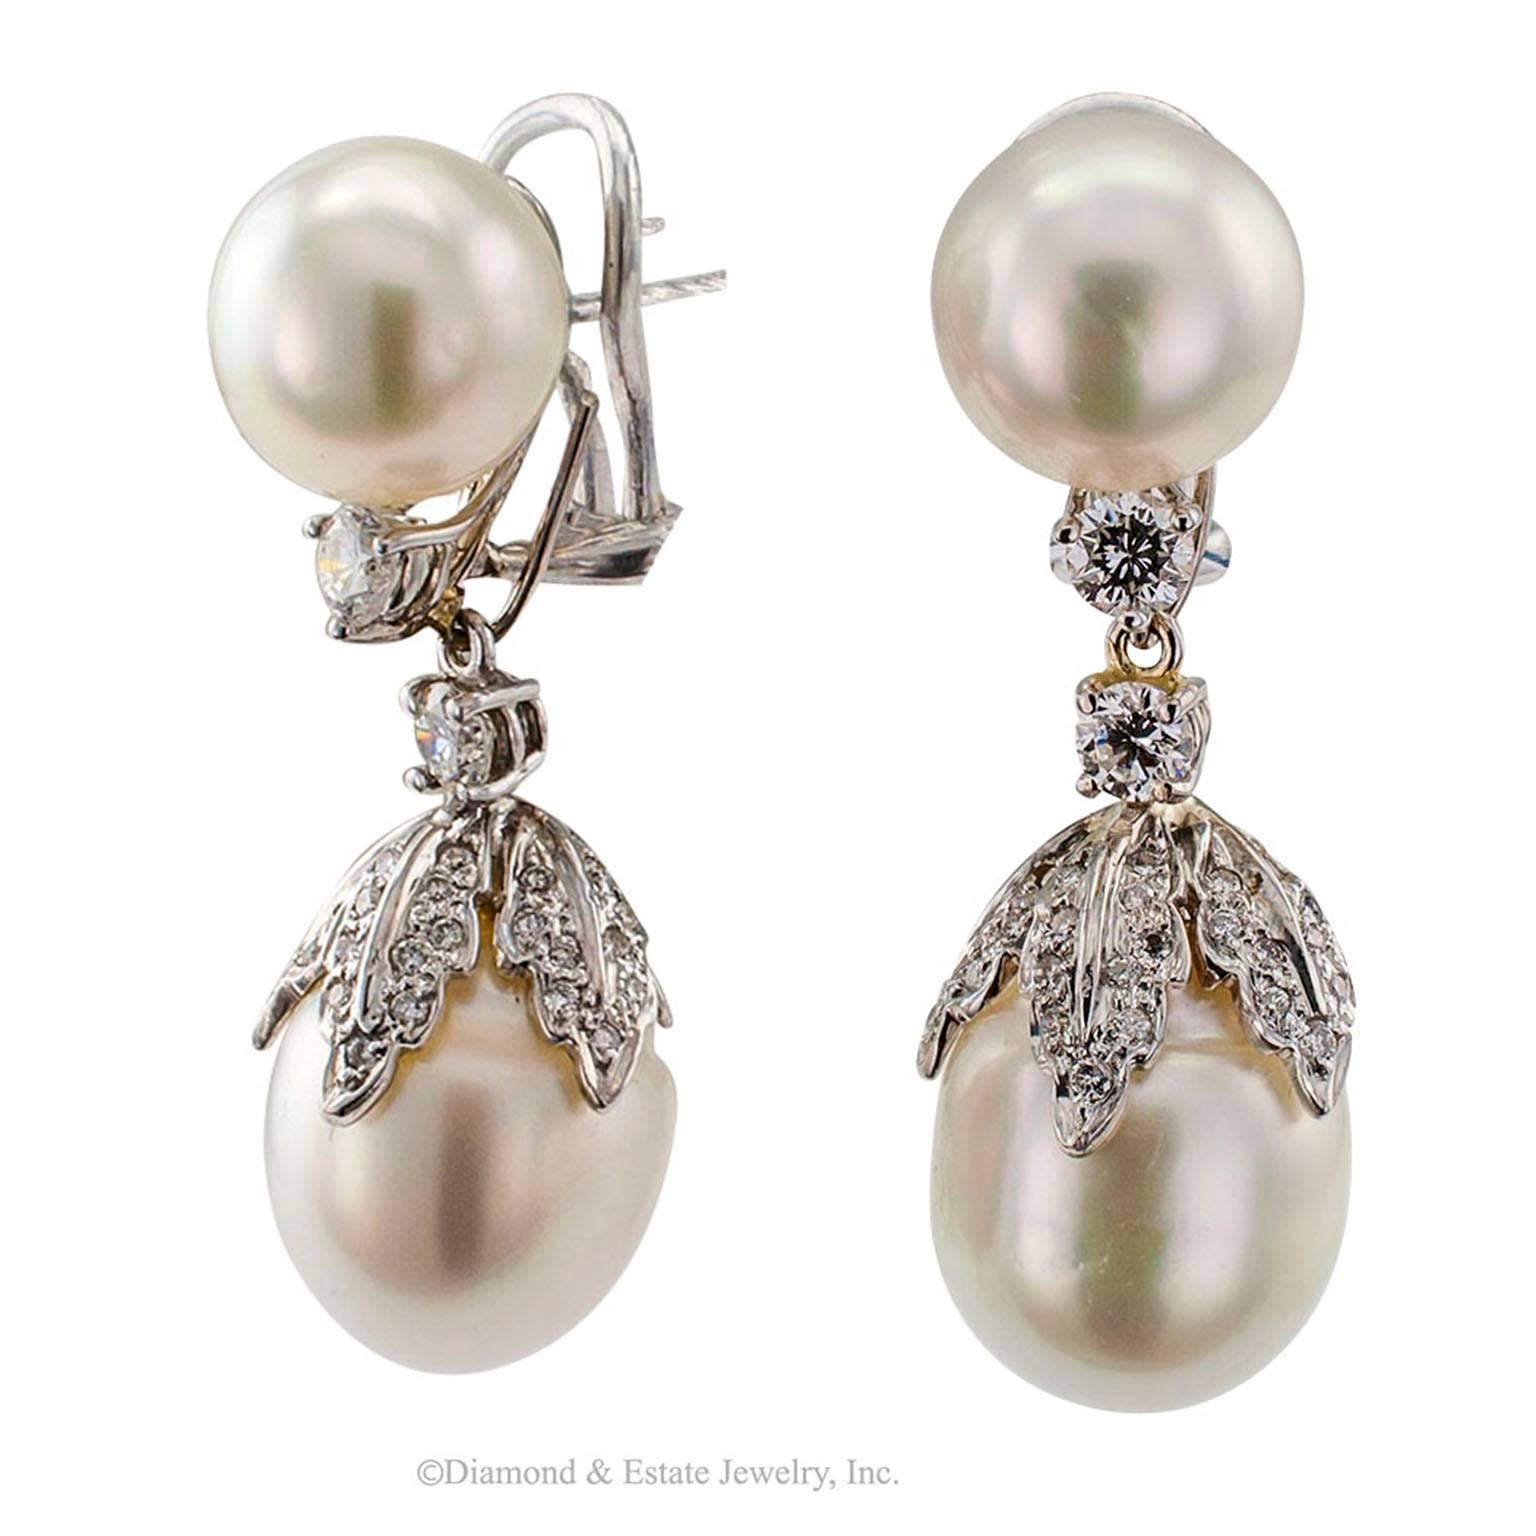 Day Into Night South Sea Pearl Diamond Gold Earrings

Day-into-night South Sea pearl and diamond drop earrings mounted in 18-karat white gold.  Comprising a pair of South Sea pearls measuring 11 mm, each under-mounted with a small round brilliant